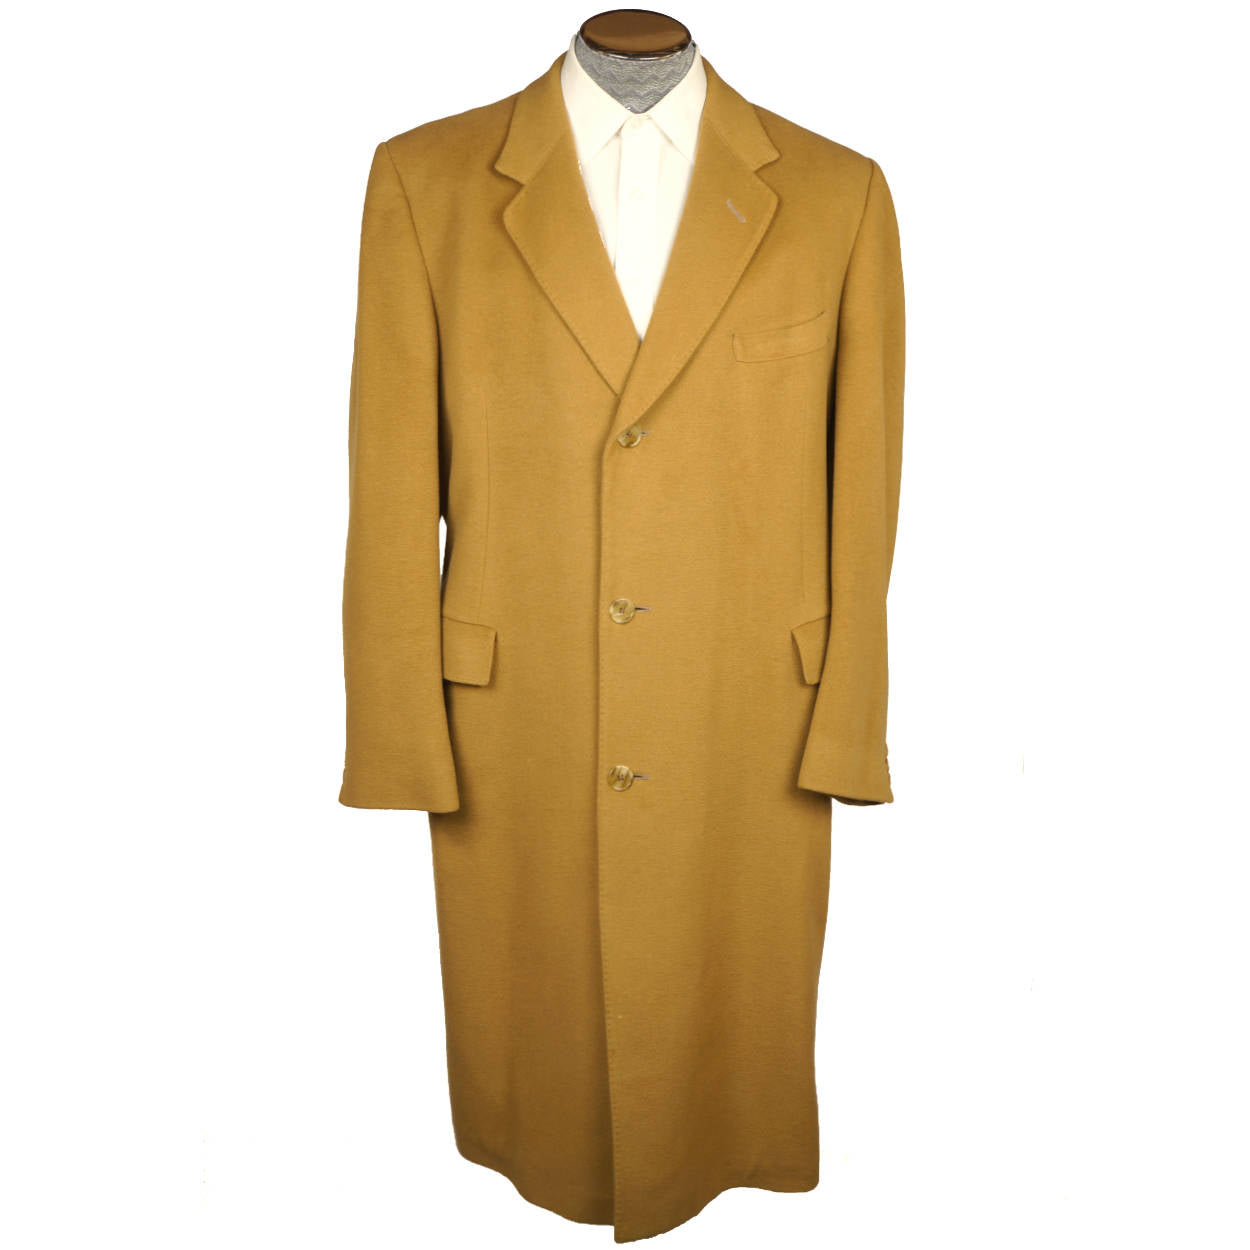 Vintage English Pure Cashmere Mens Overcoat Camel Colour Coat Made ...